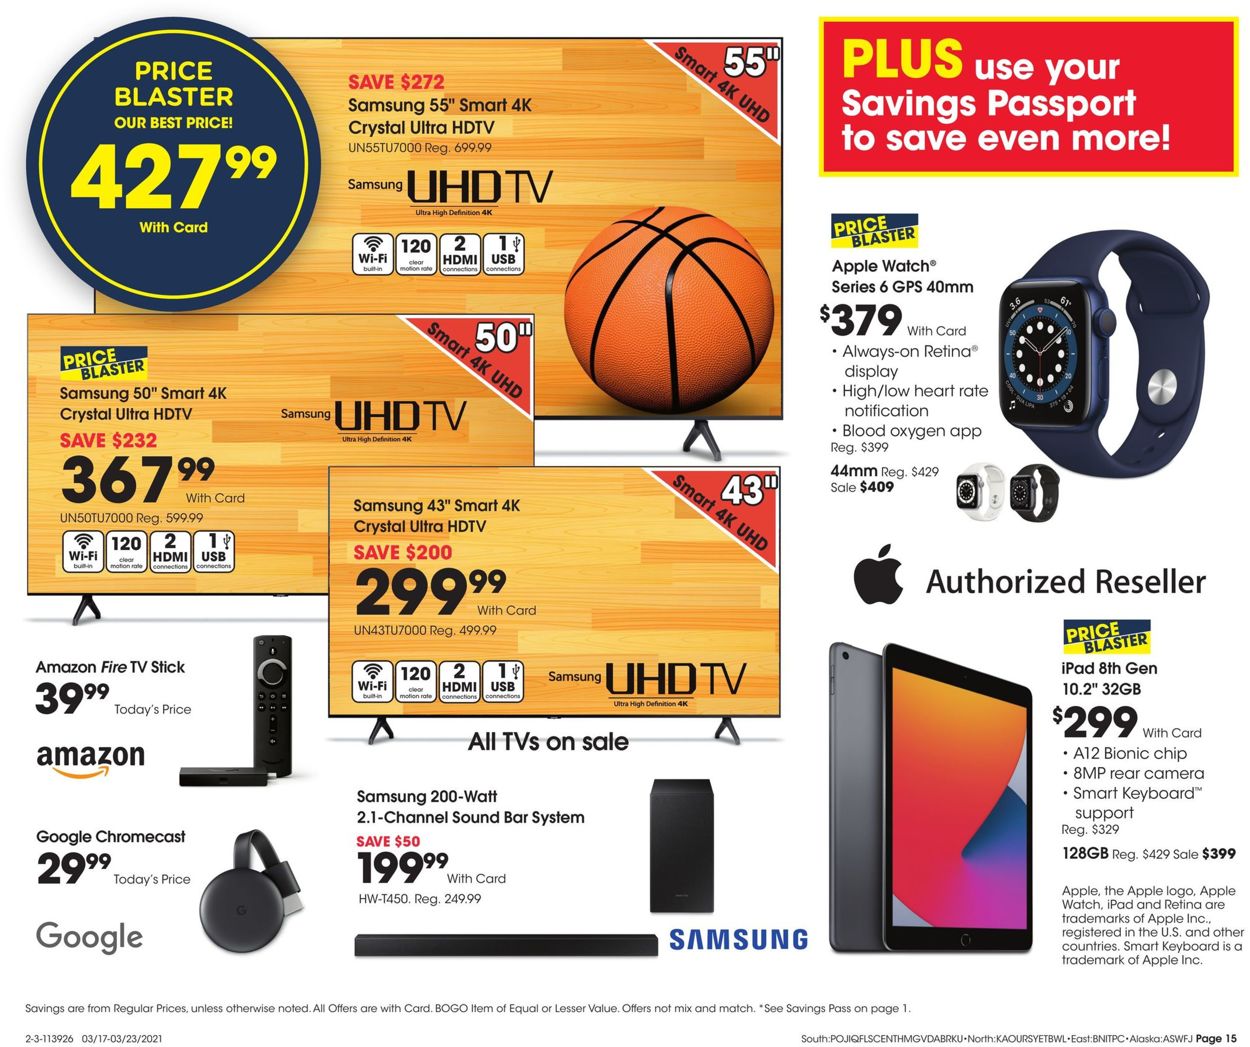 Catalogue Fred Meyer from 03/17/2021